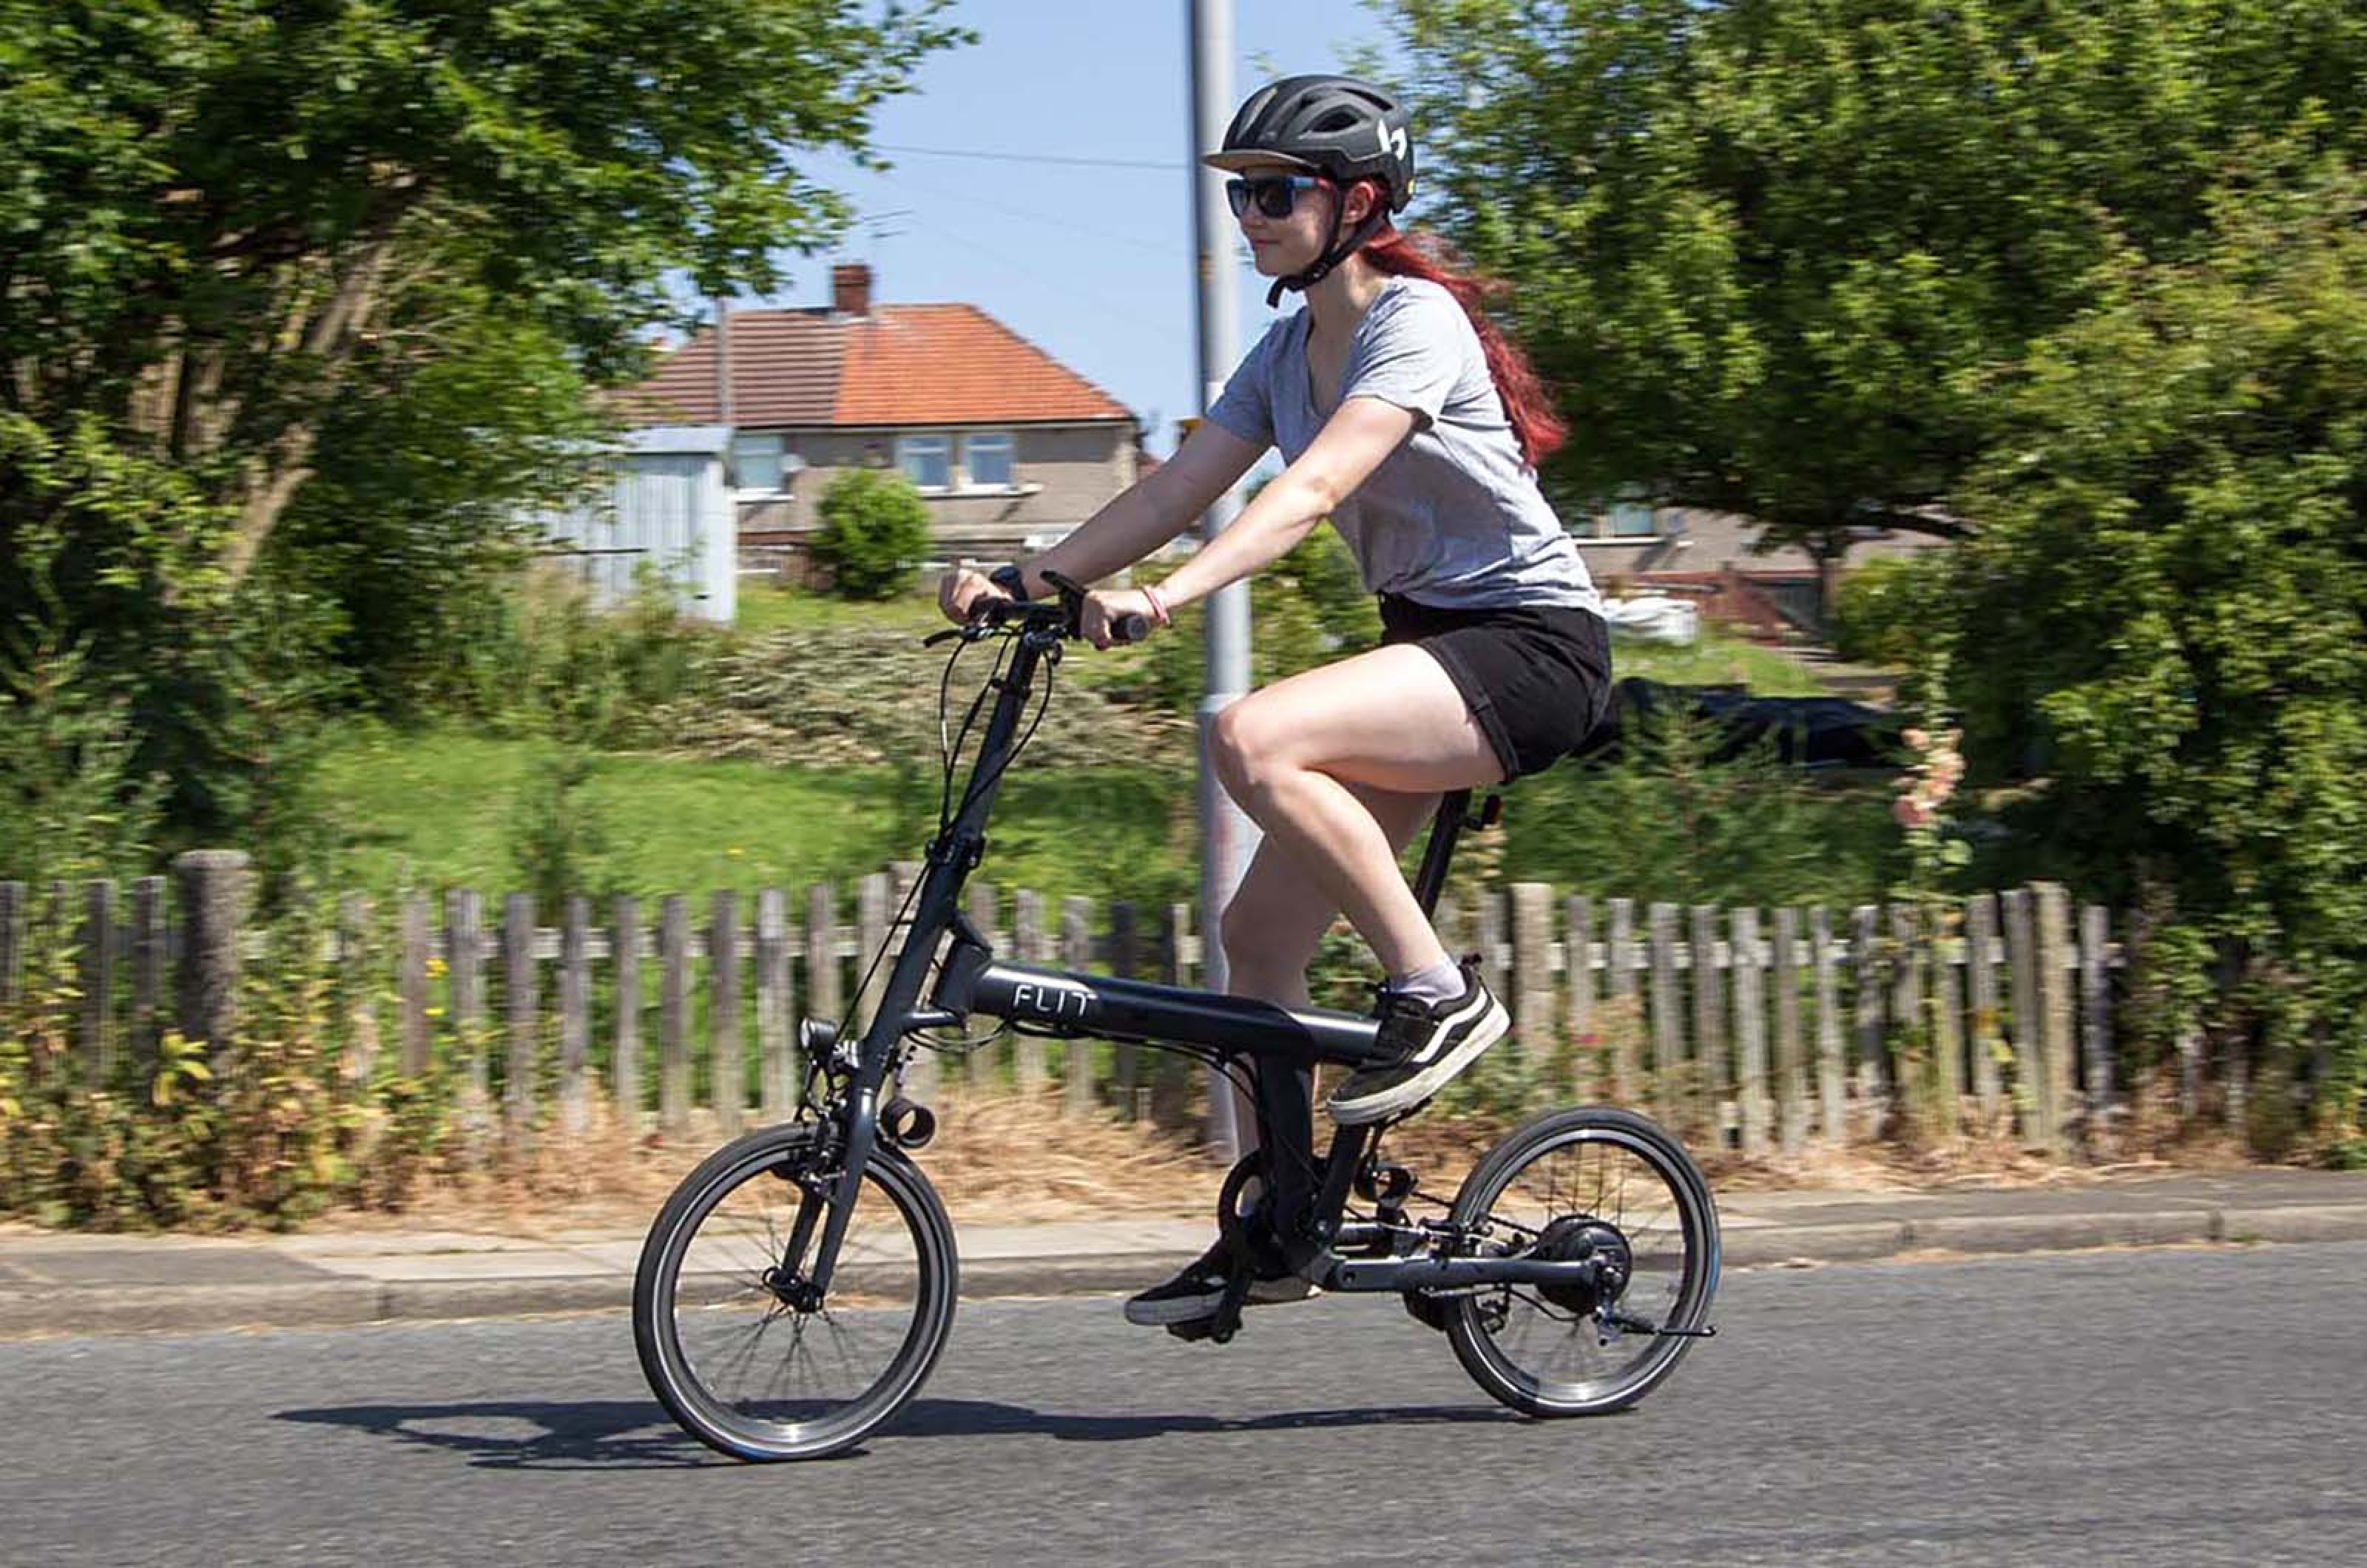 <p>Lightweight, compact and great to ride, the Flit-16 is a solid choice when it comes to electric folding bikes. The Flit uses a punchy Bafang rear battery and motor hub which – despite its single-speed setup – provides more than enough power for steep gradients. </p>  <p>And because it tips the scales at just 15kg, it's easy to fold and compact enough to fit inside the boot of your car. Depending on the type of riding, the Flit has a range of up to 31 miles. </p>